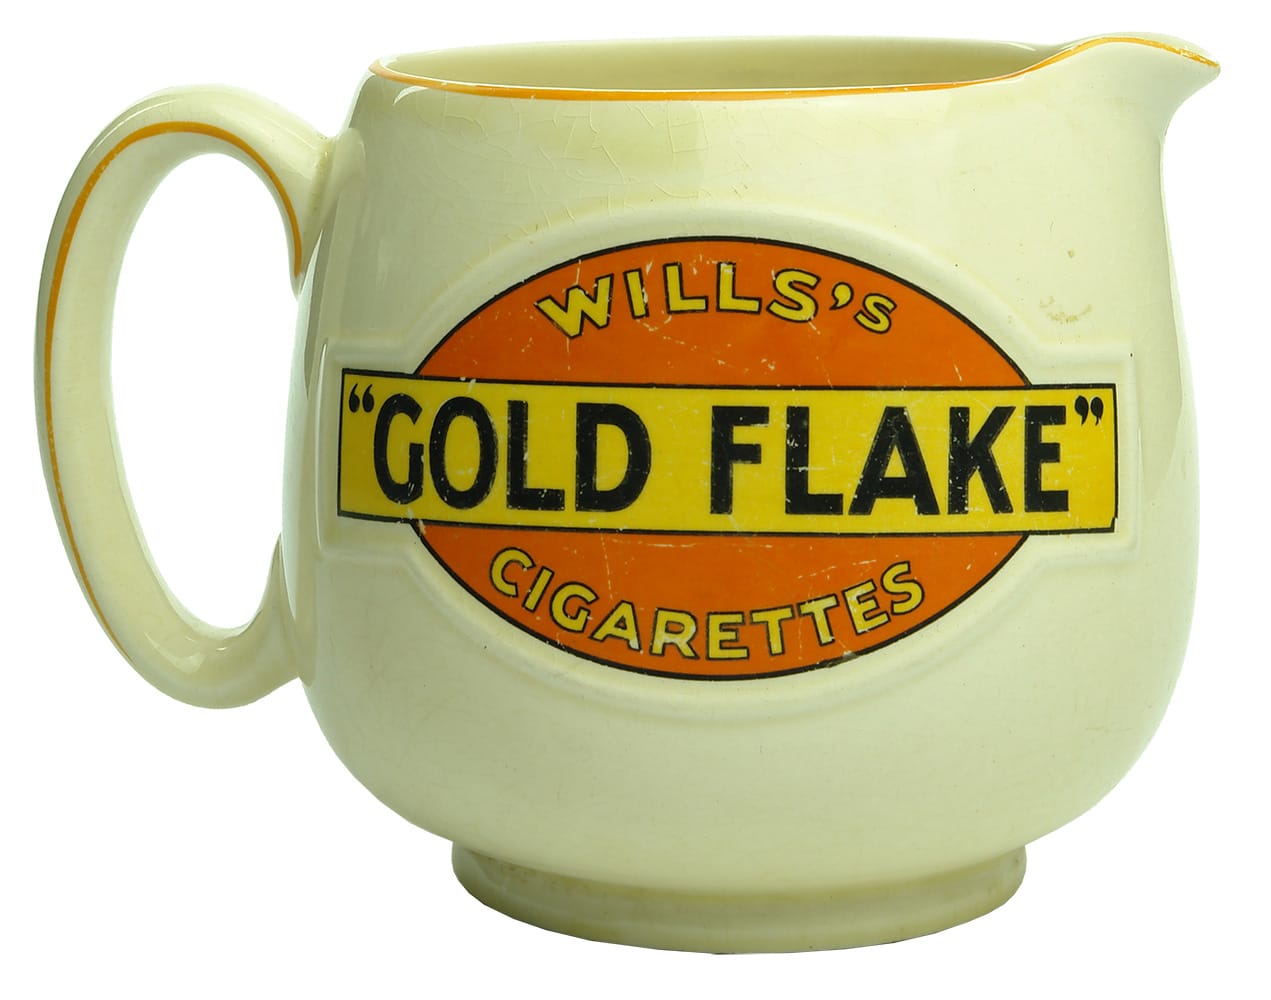 Antique Will's Gold Flake Cigarettes Advertising Water Jug